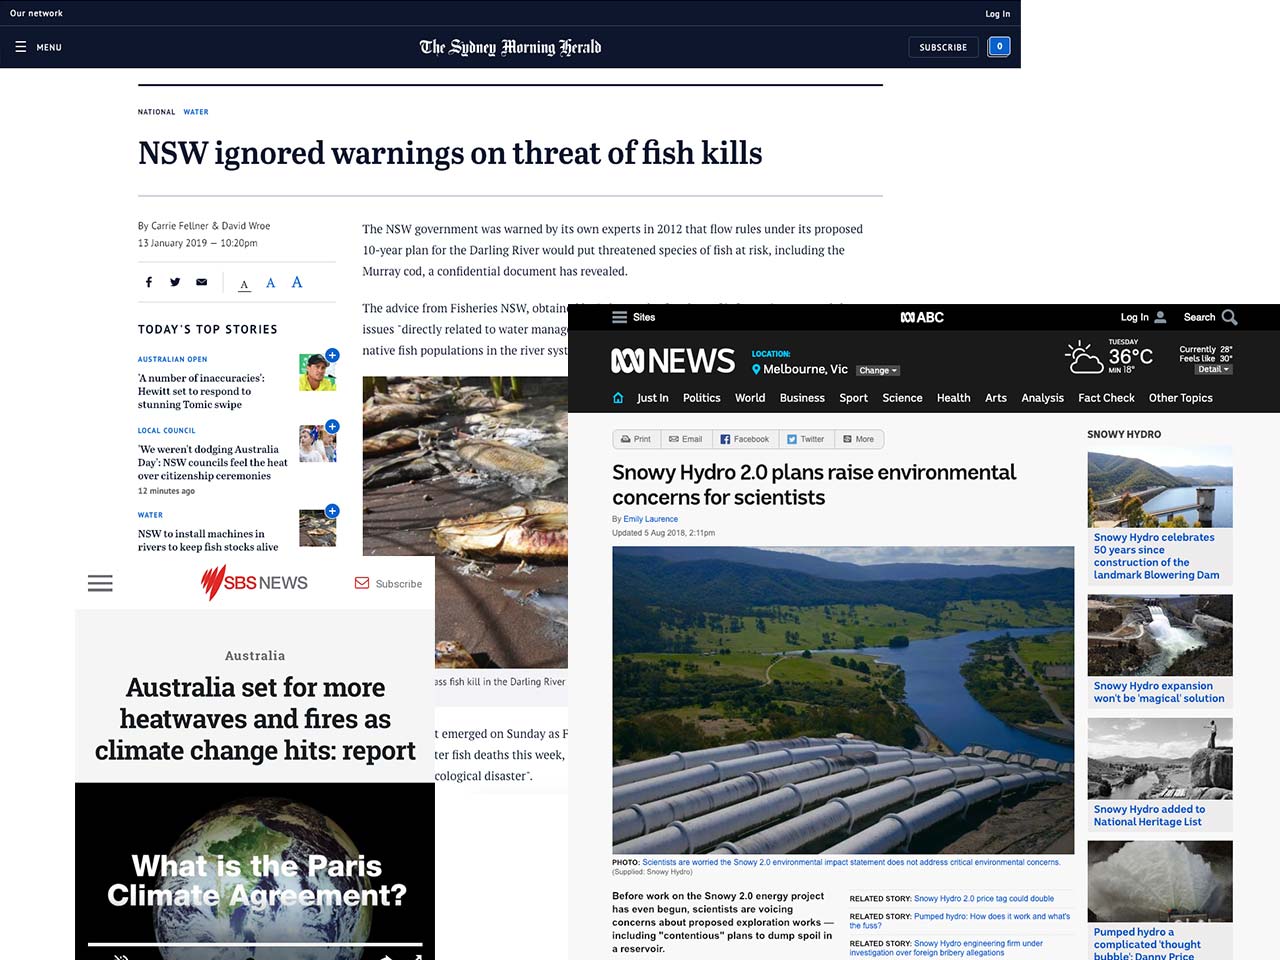 A set of news articles showing the impact of climate change. Covering the impact of fish in rivers, renewable projects and heatwaves.